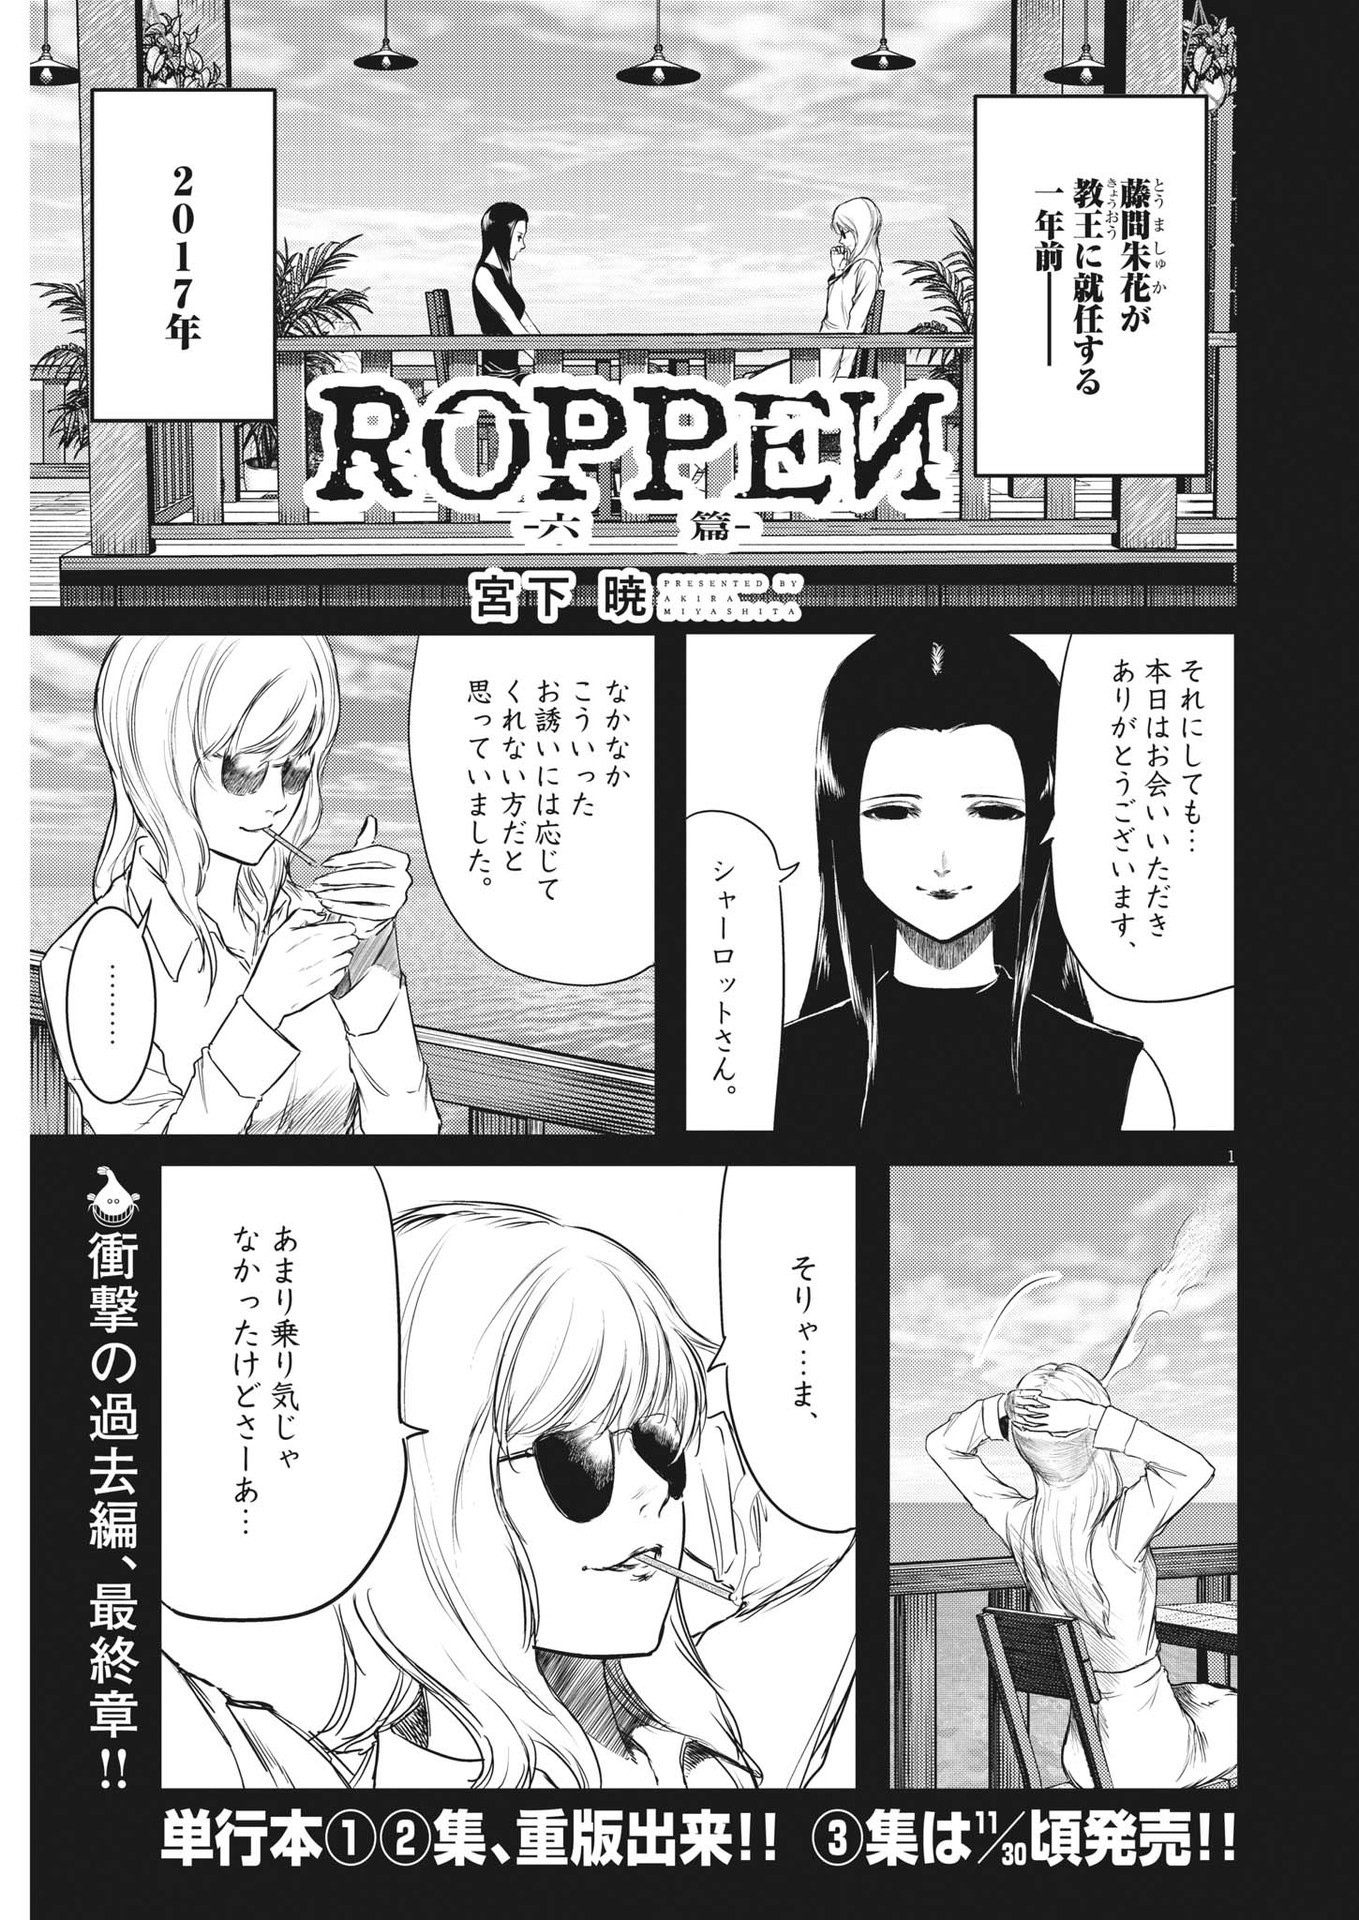 Roppen - Chapter 33 - Page 1